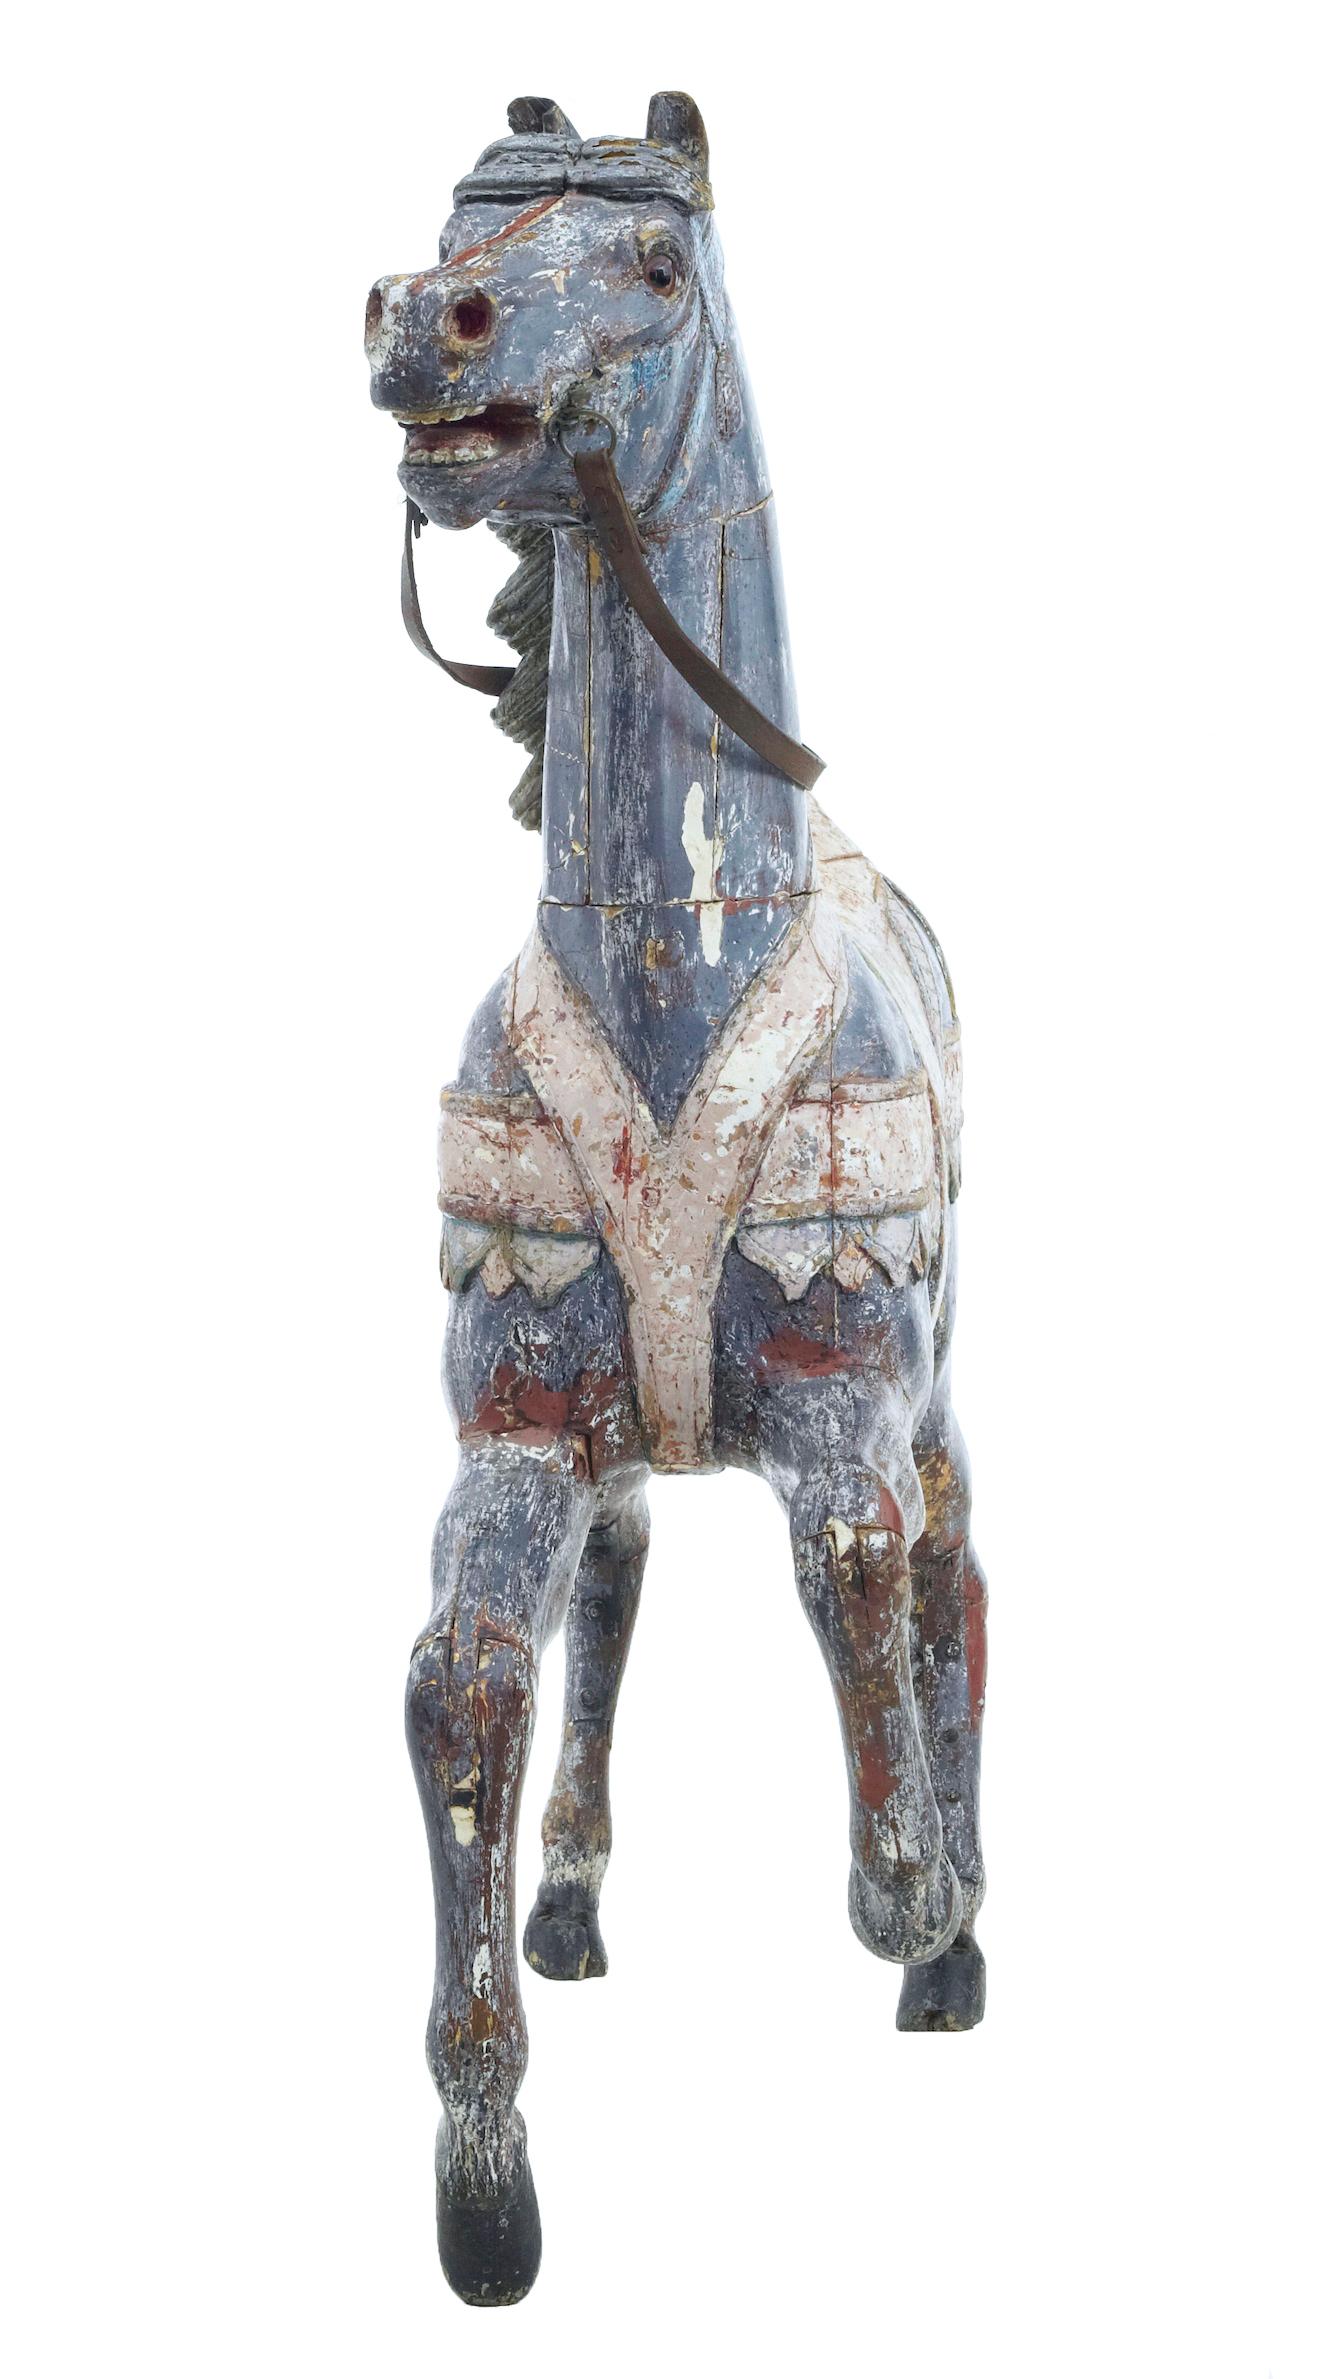 Early 20th century continental decorative carousel horse, circa 1900.

Unique continental painted merry-go-round horse, circa 1900. Excellent opportunity to own this highly decorative item. Now with its original coats of decorative paint dry